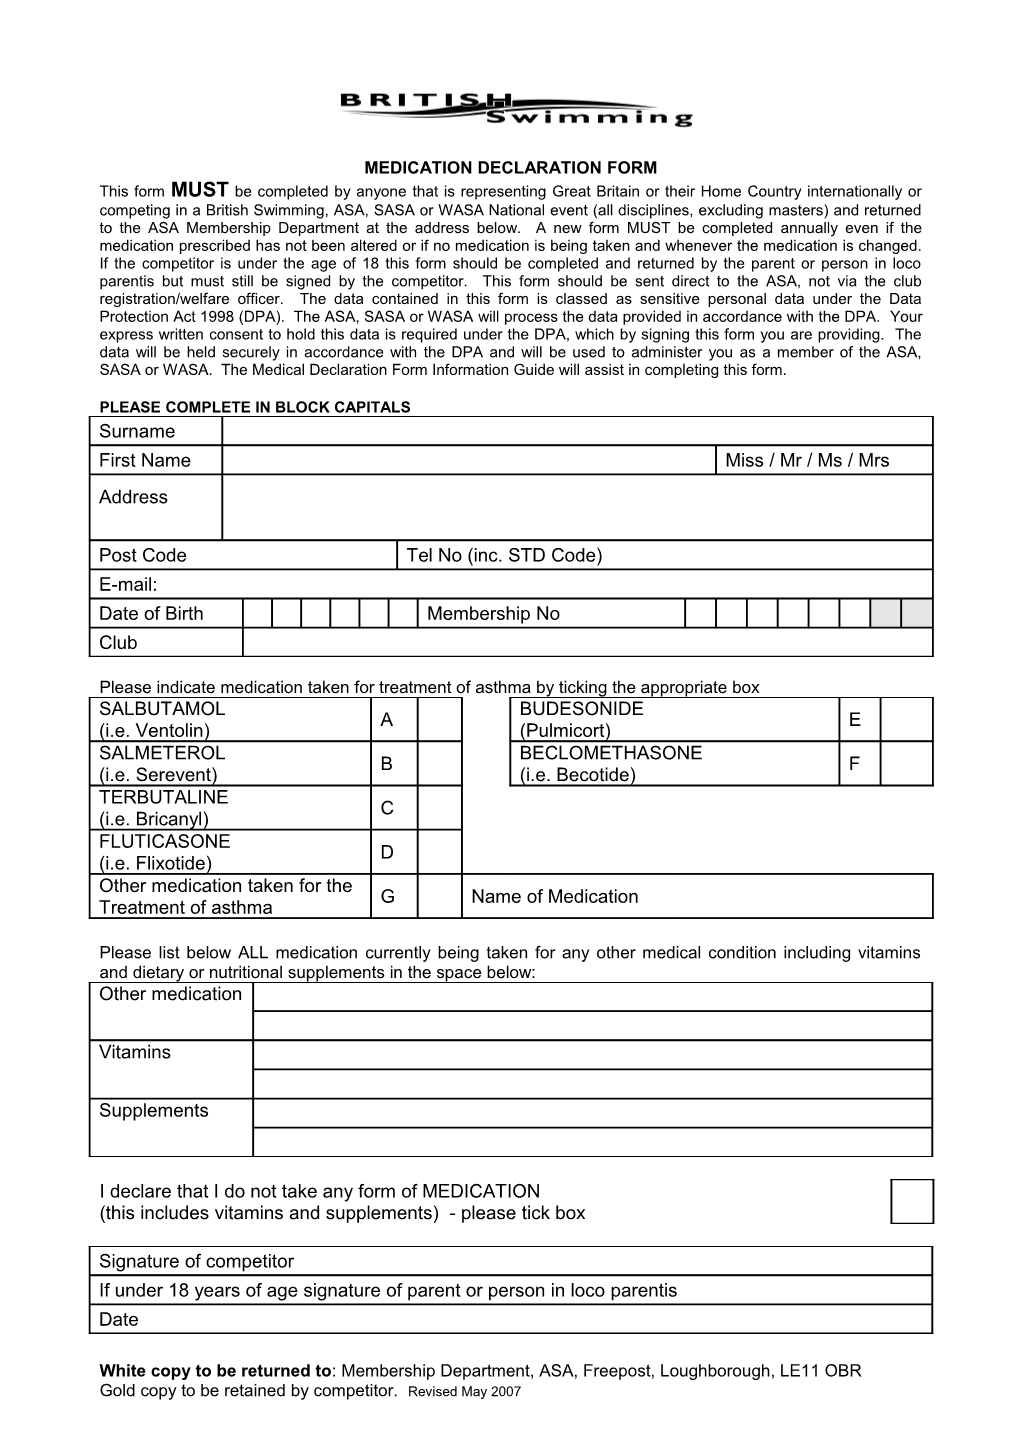 As Part of the Registration Process This Form Should Be Completed and Returned by Any Competitor